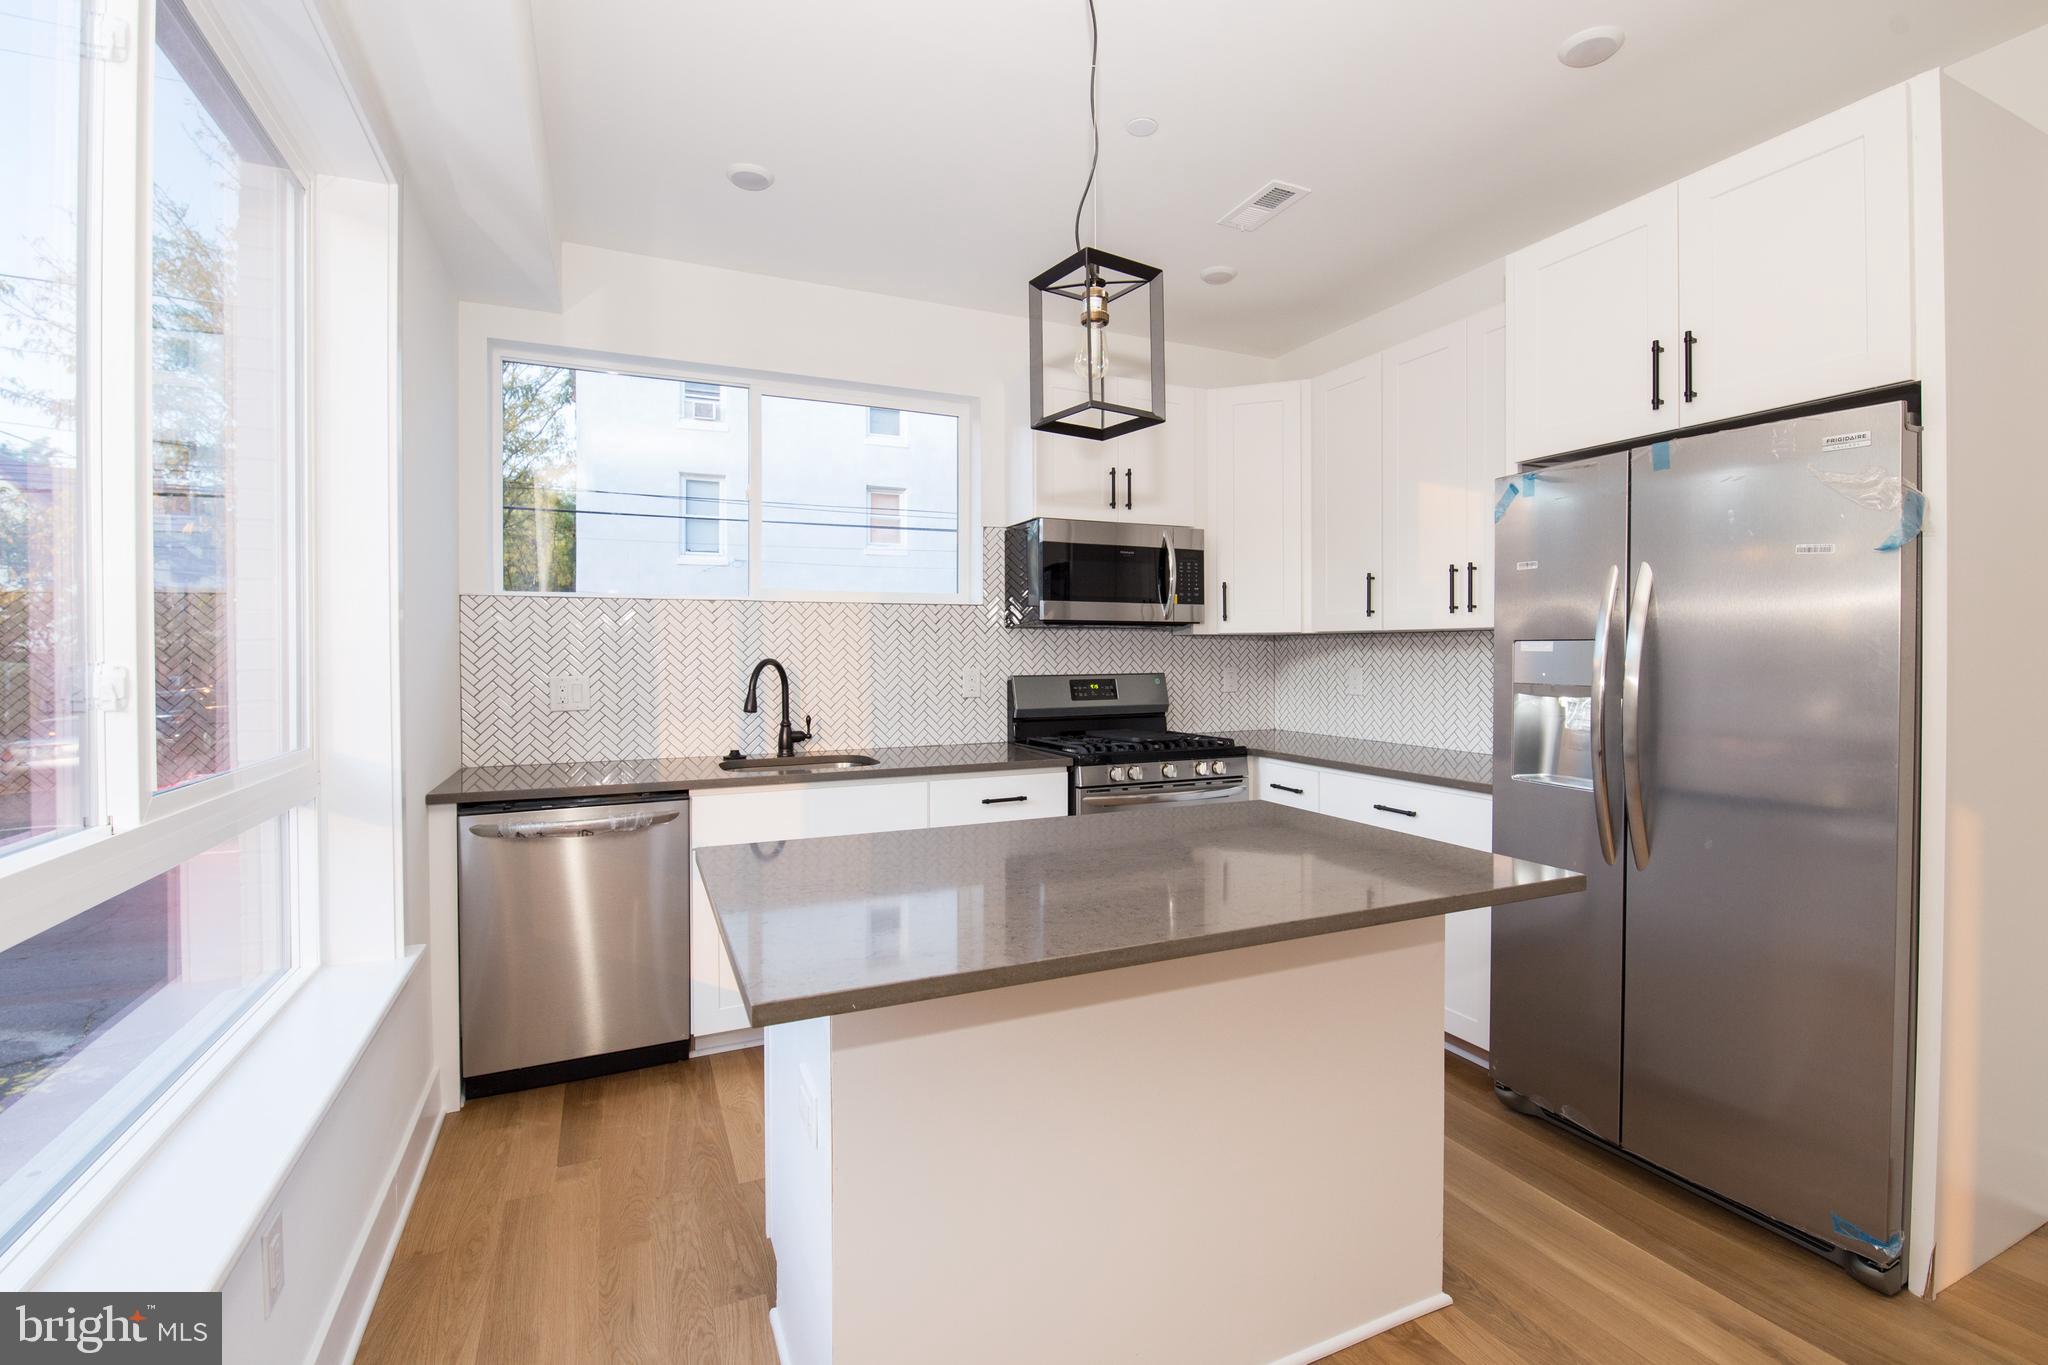 a kitchen with stainless steel appliances granite countertop a refrigerator a sink dishwasher a stove top oven a refrigerator and white cabinets with wooden floor